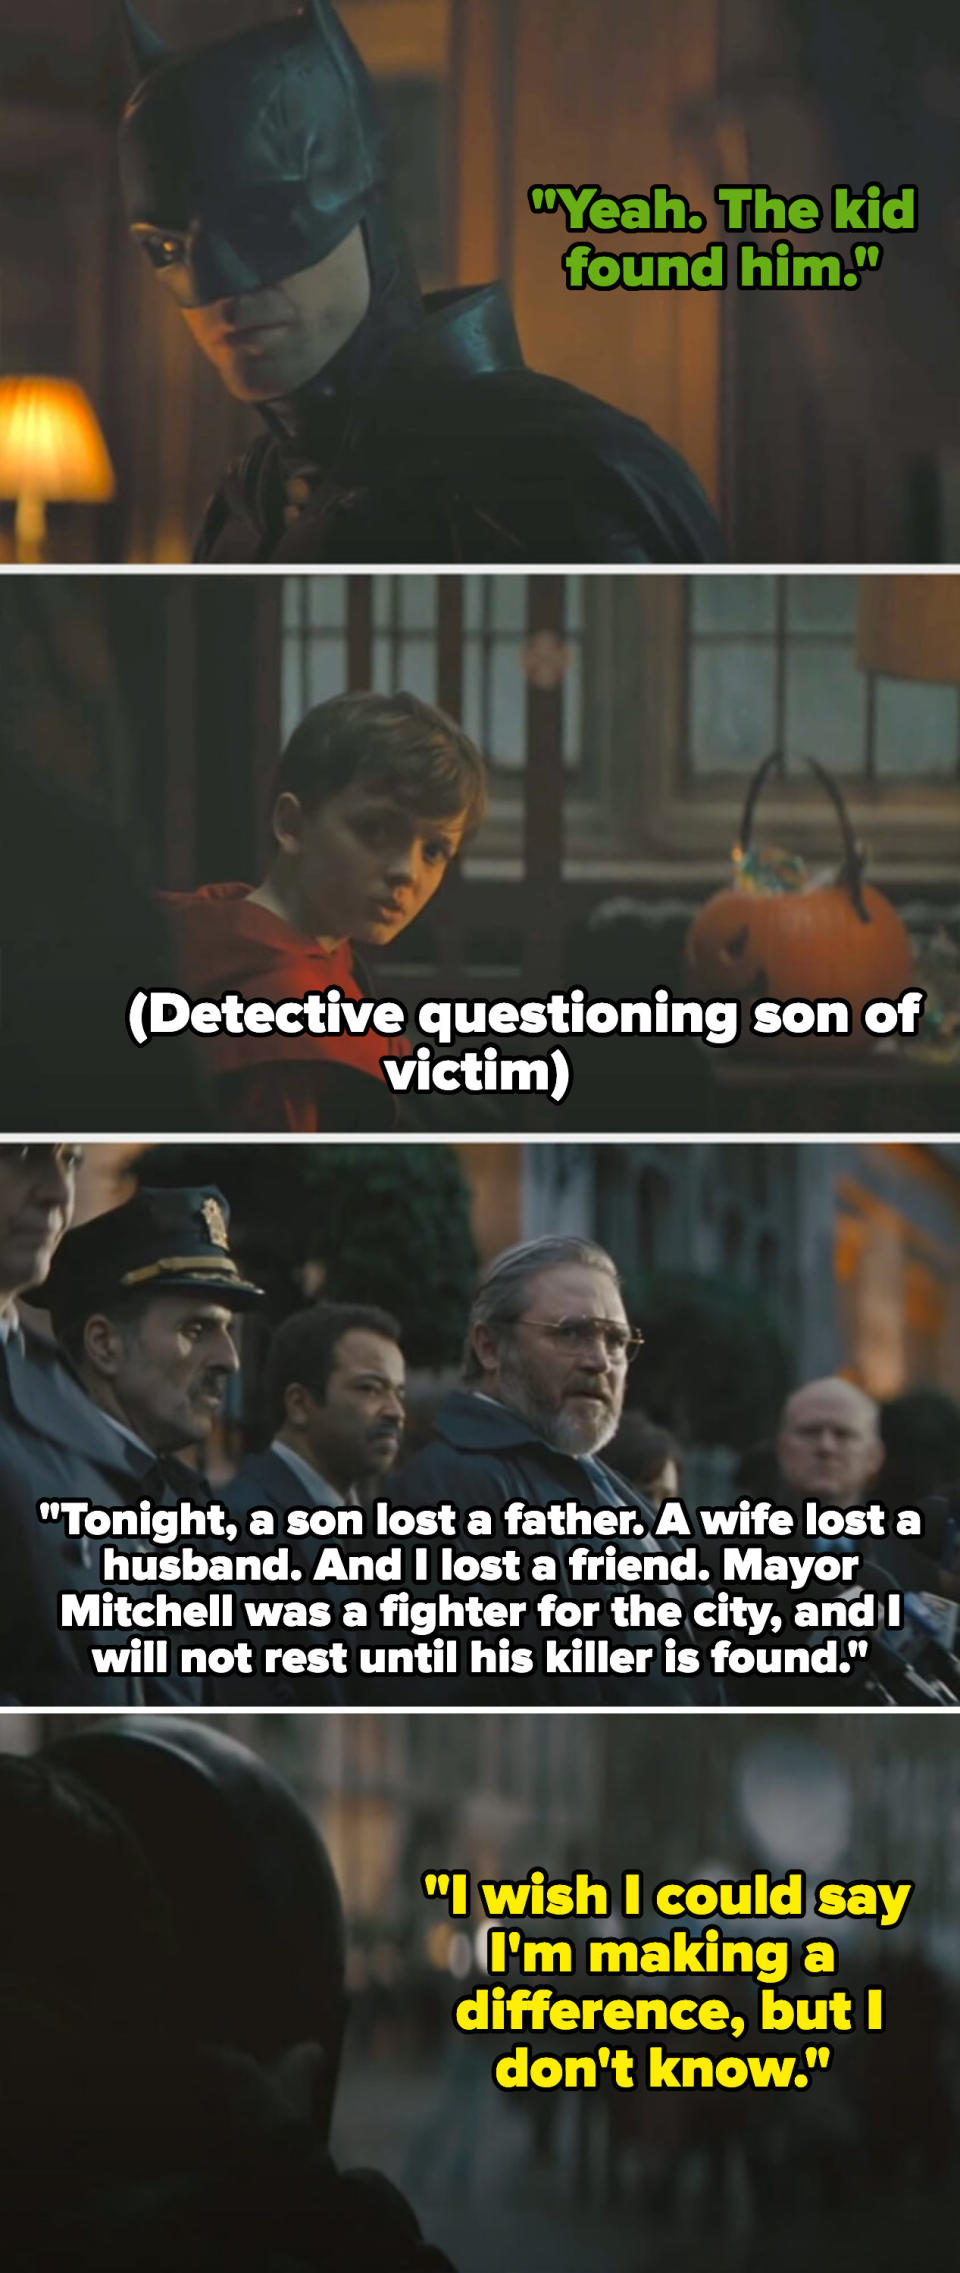 gordon tells bruce that the kid found his father, and bruce looks at the boy as he's questioned. later, there's a press conference on the mayor's death, and in a voiceover, bruce says he wishes he could say he's making a difference but he doesn't know